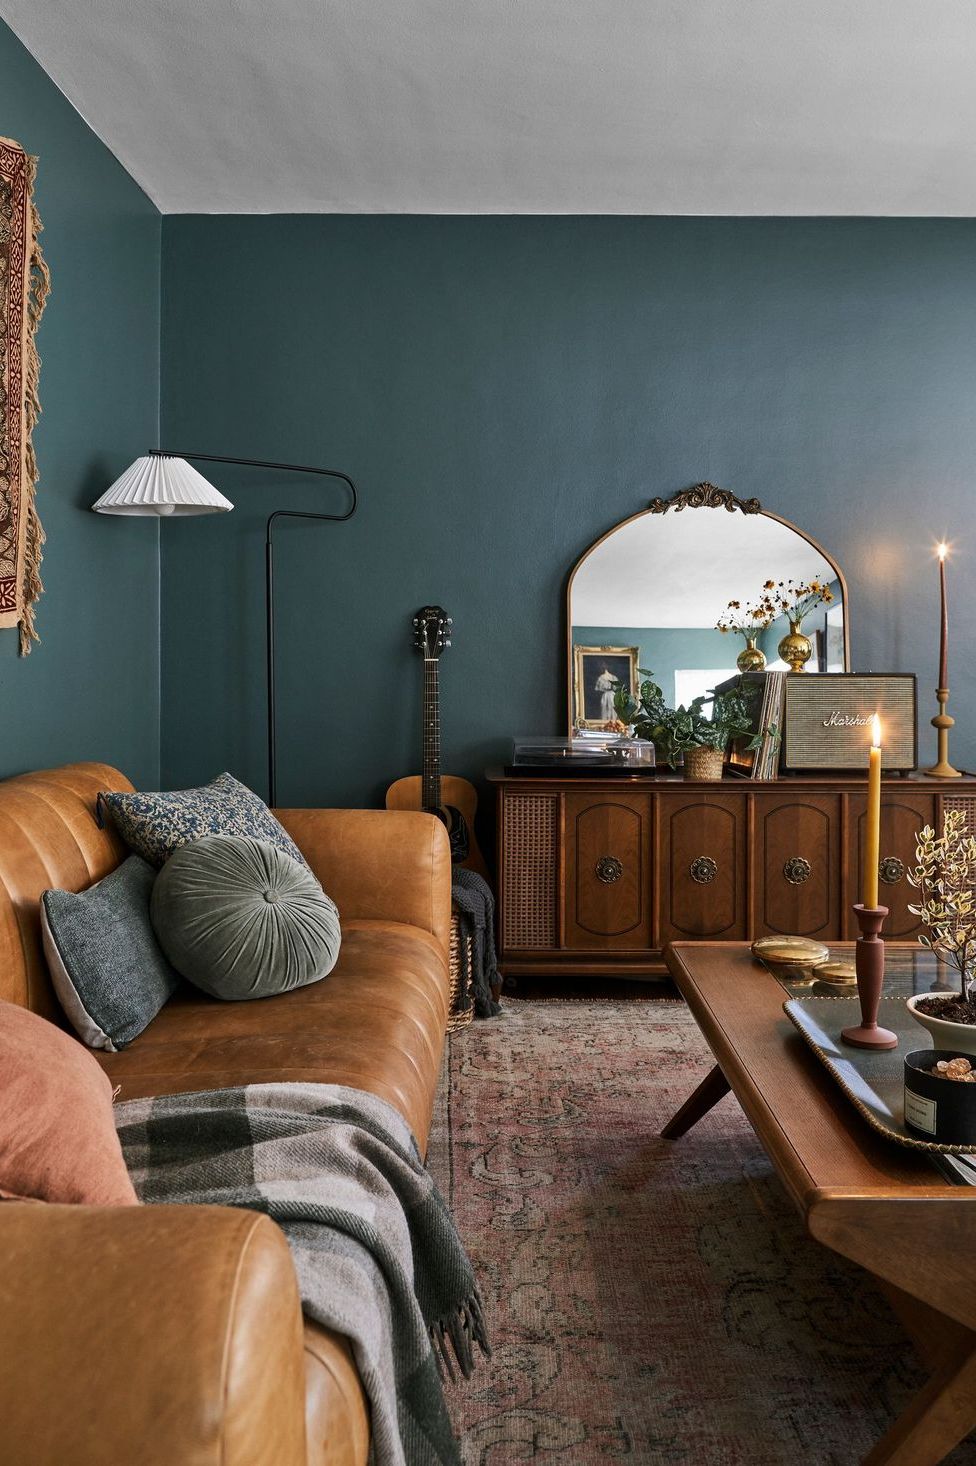 blogger ryann miller painted her living room walls a dark green color — current mood by clare paint,